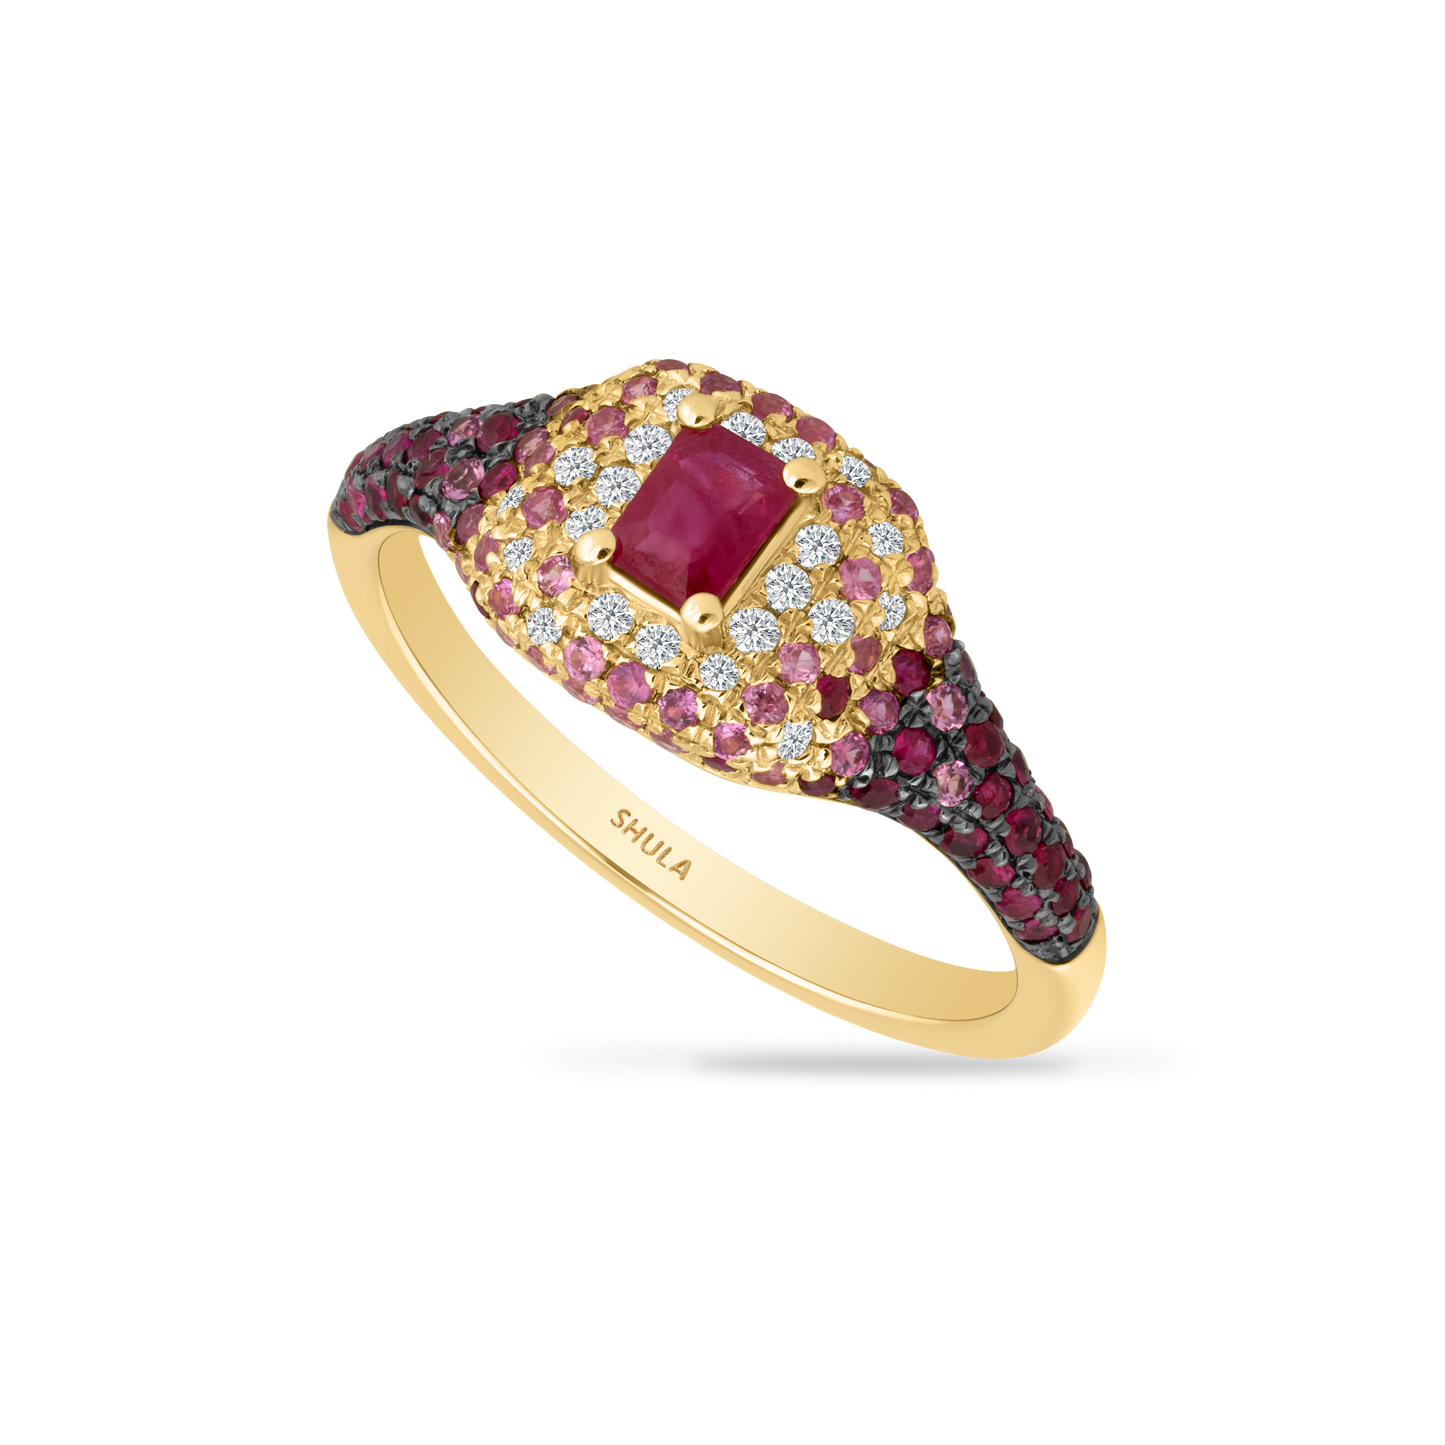 14K RING WITH 22 DIAMONDS 0.11CT, 46 RED RUBIES 0.29CT, 48 PINK SAPPHIRES 0.28CT AND 1 CENTER RUBY EMERALD 0.33CT RING